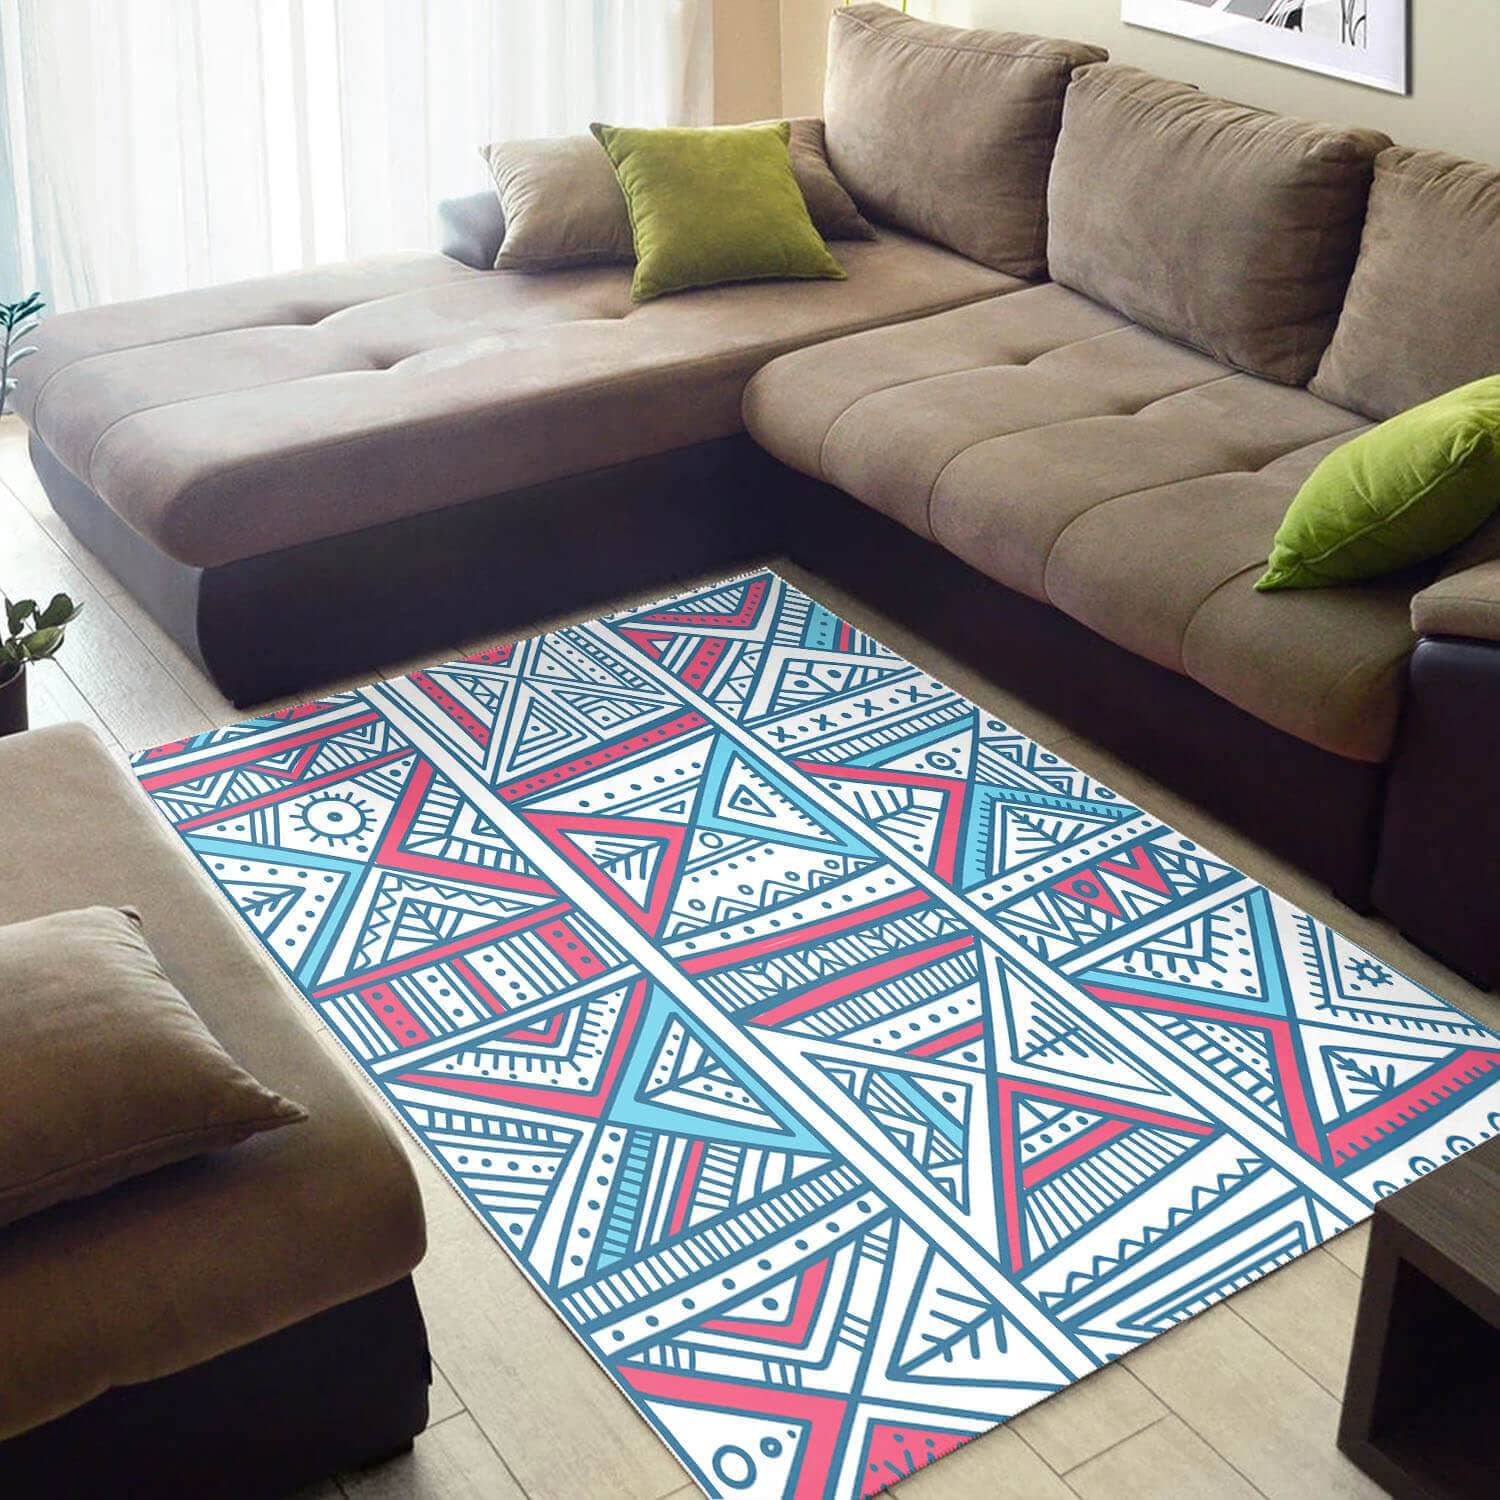 Beautiful African Unique Black History Month Ethnic Seamless Pattern Style Carpet Rug